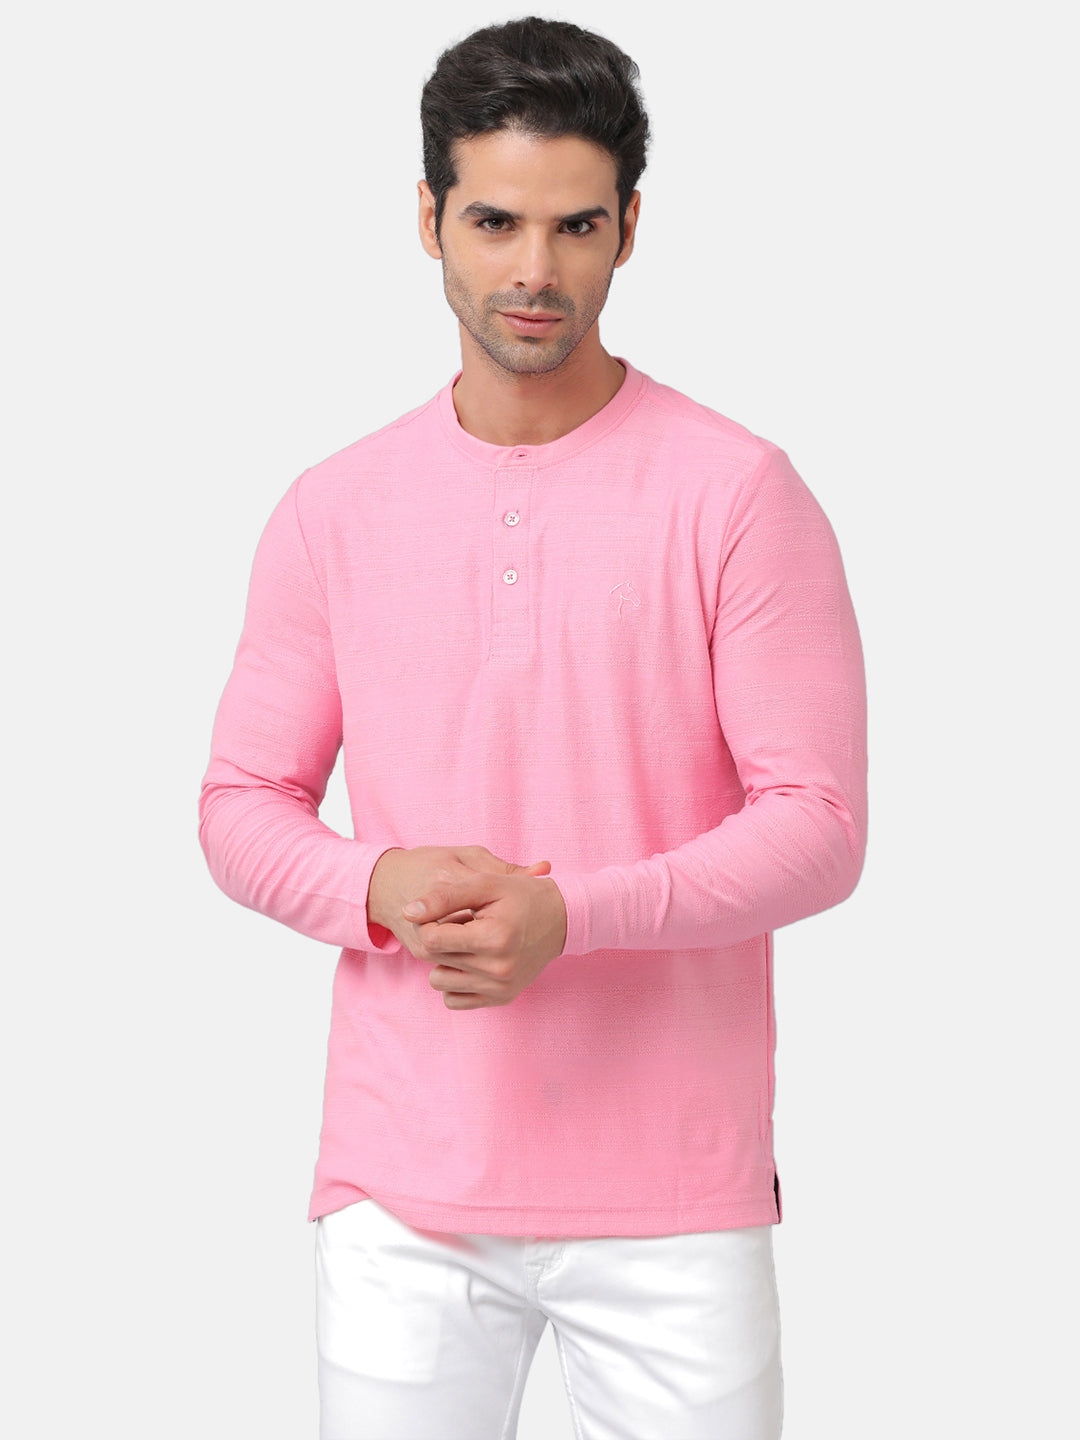 CP BRO Men's Cotton Solid Slim Fit Full Sleeve Round Neck Pink Color T-Shirt | Verno 312